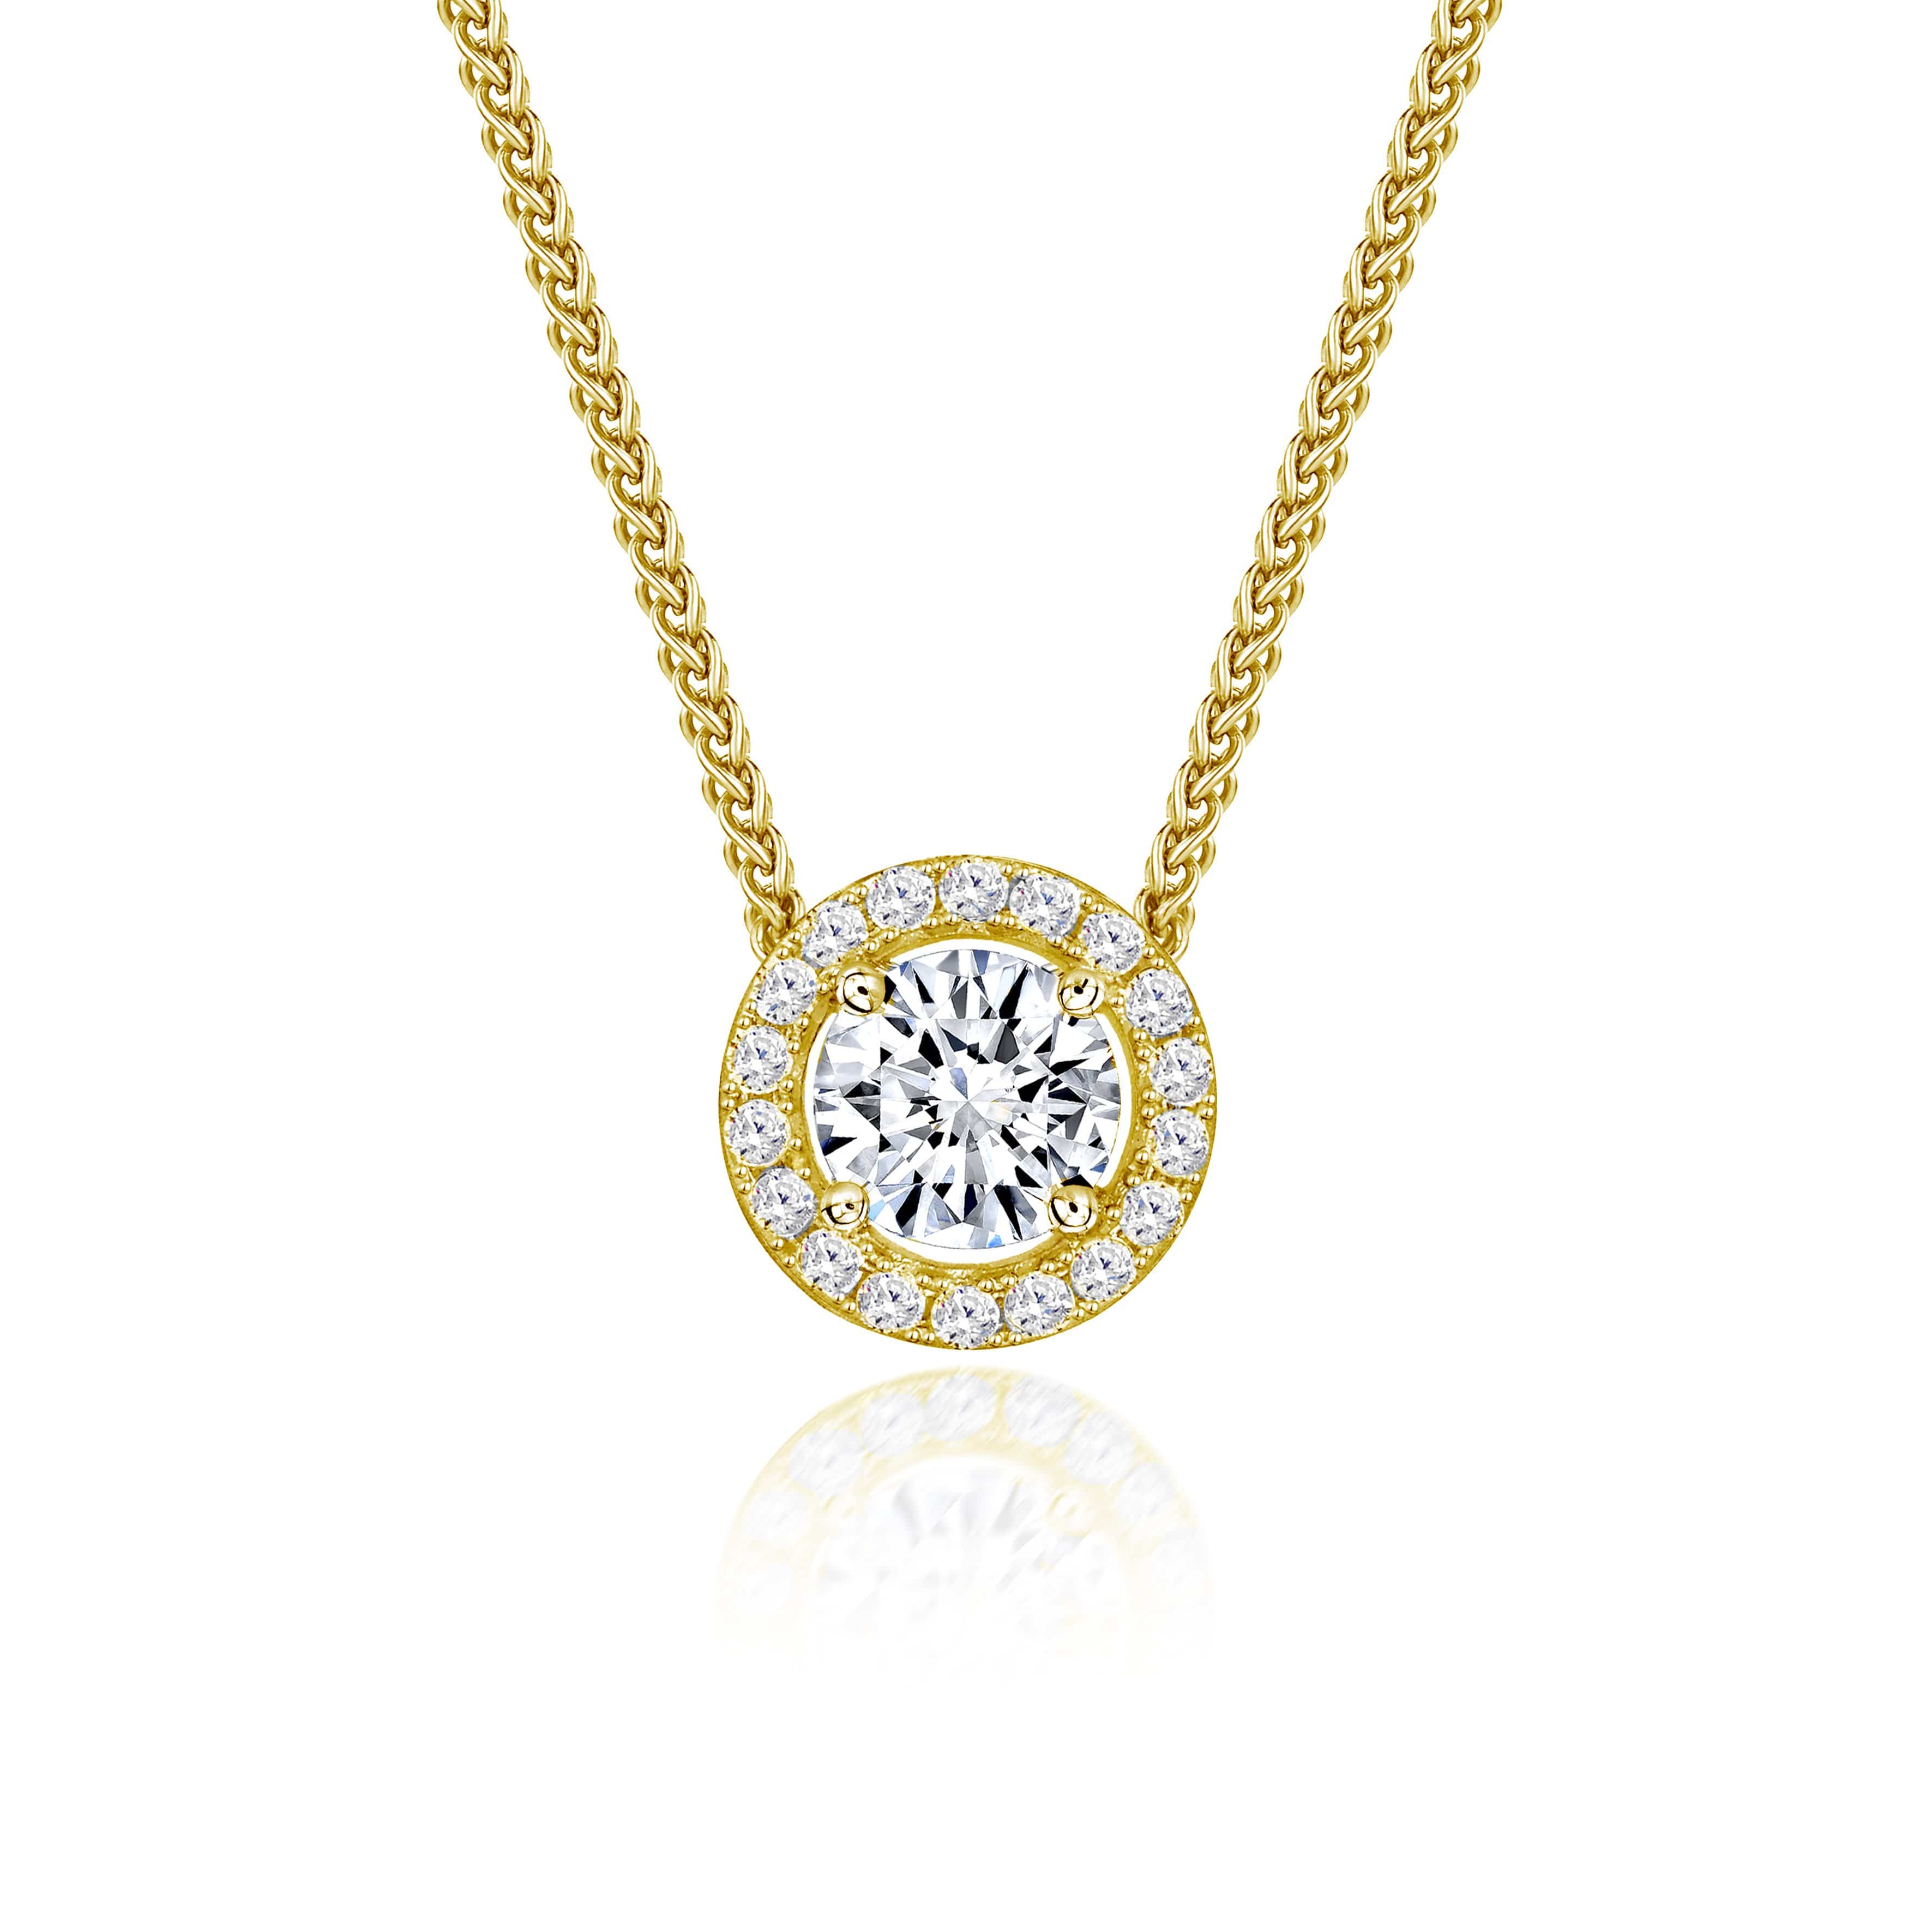 Lynora jewellery Necklace 18ct Gold Plated / Clear Halo Yello Gold Plated Elevated Pendant